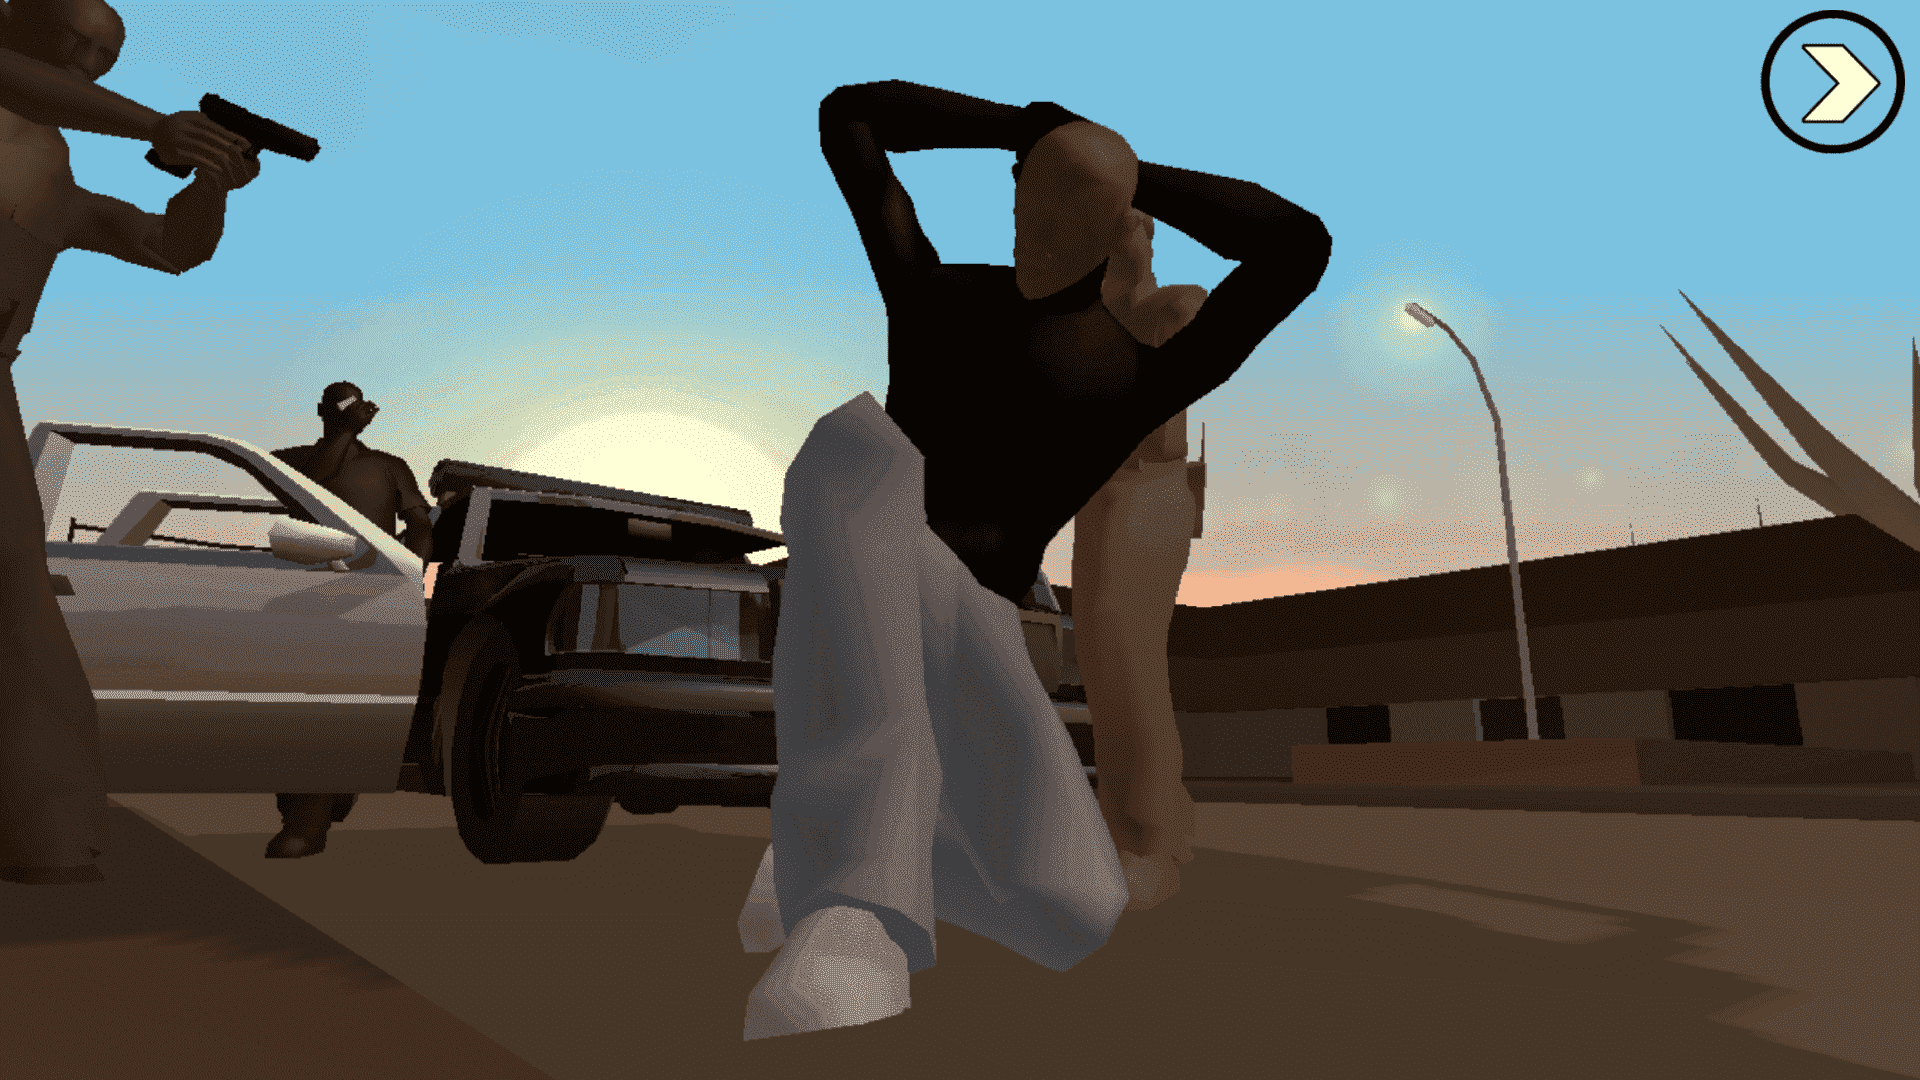 San Andreas Graphics not working right, images attached f27ca71d-c3b1-4e37-8751-4e8fae0a0a2b?upload=true.png